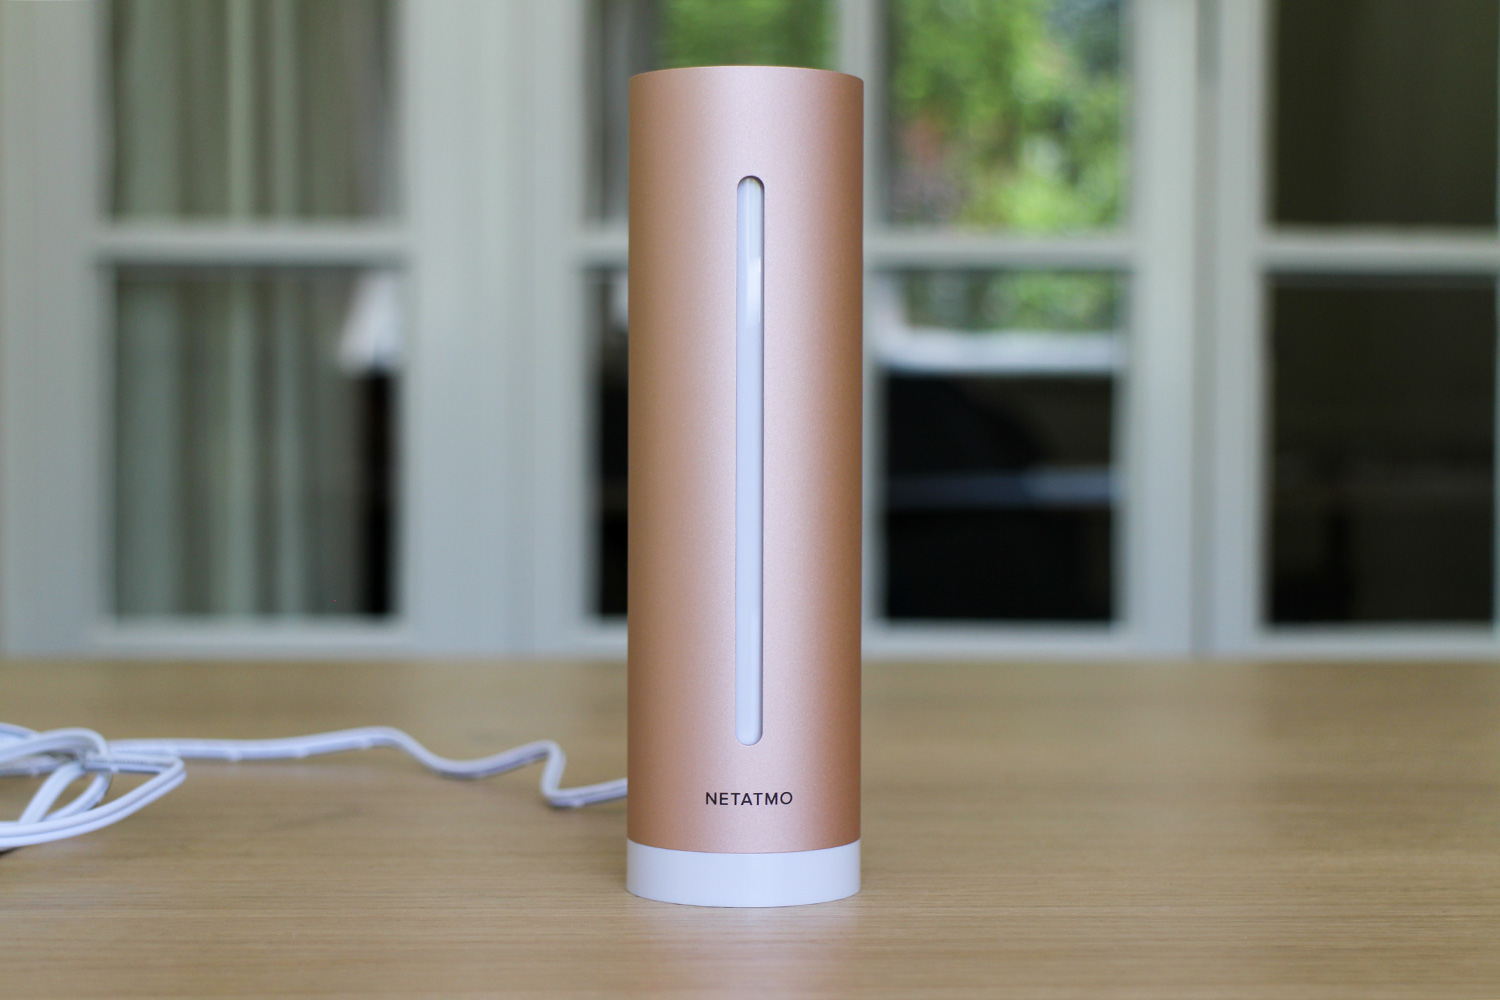 Netatmo adds support for Alexa, Google Home and Apple Home Kit